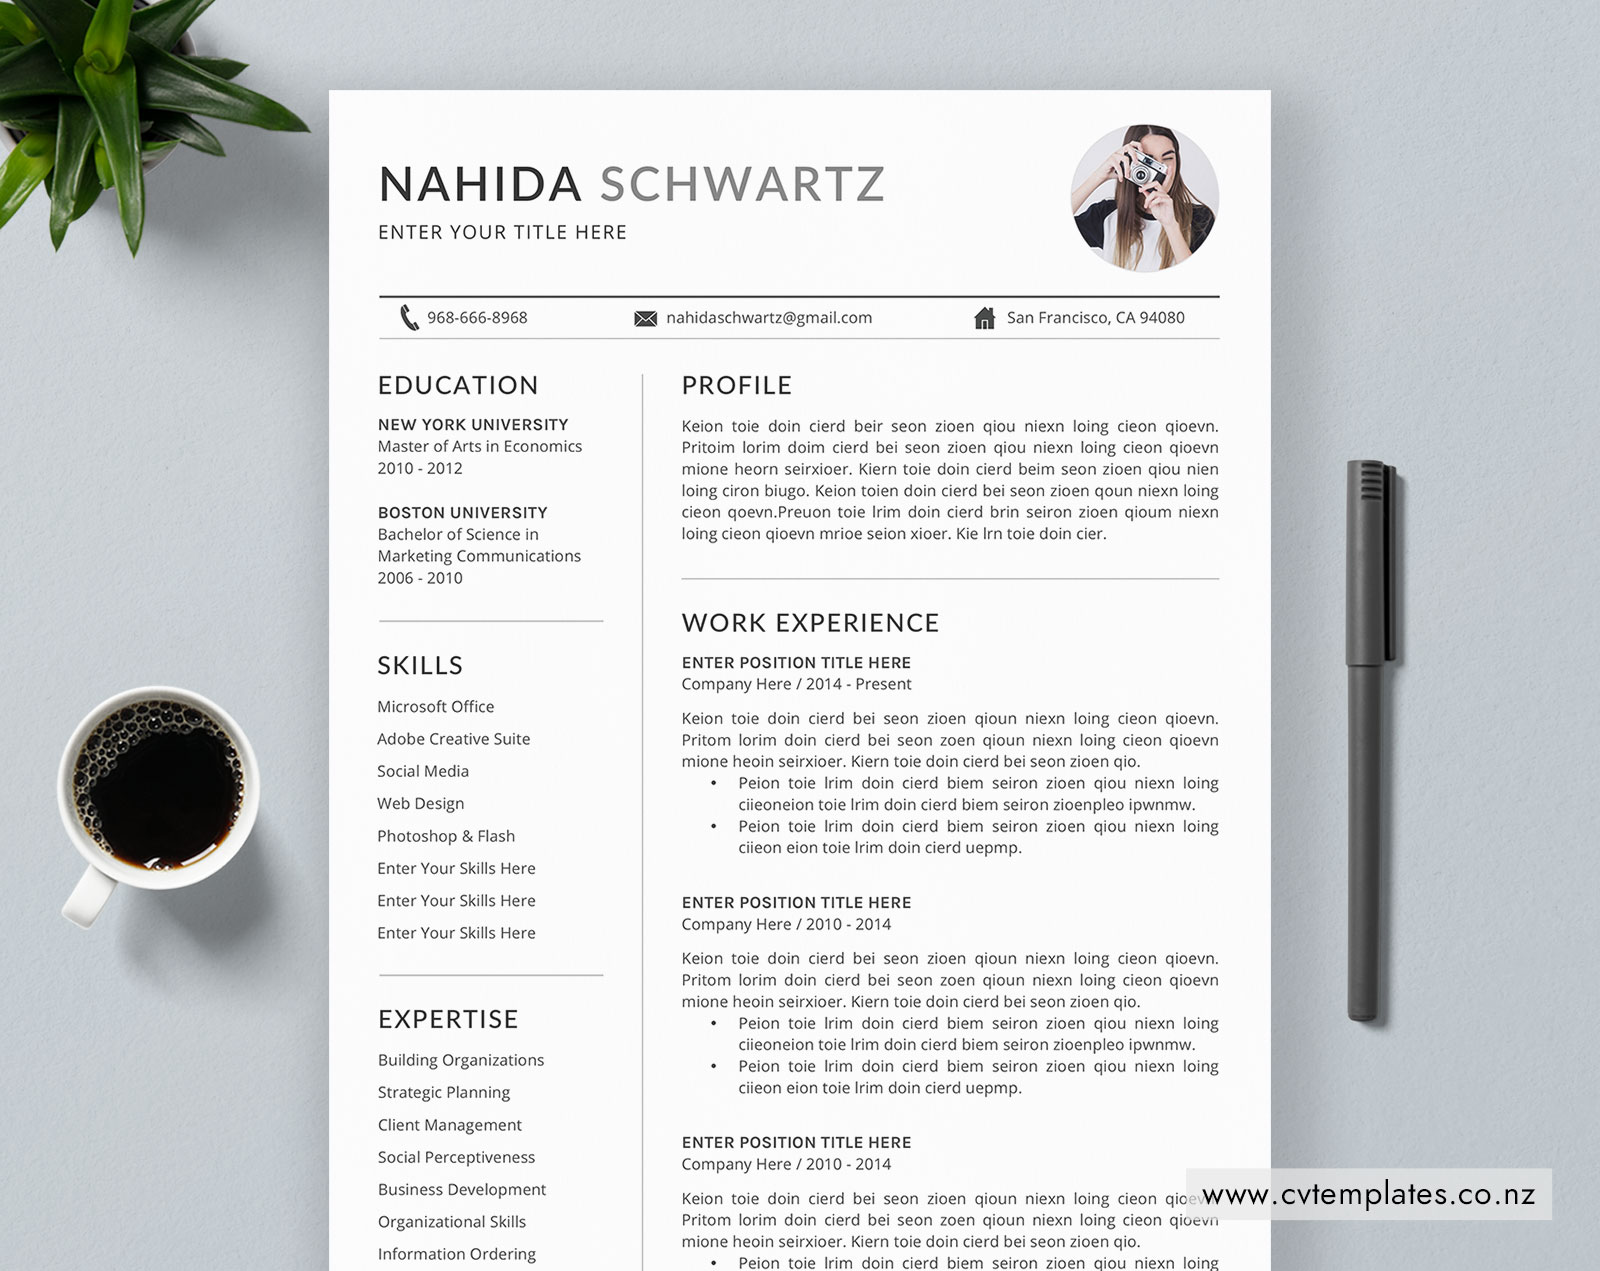 Simple Resume Cover Letter Templates from www.cvtemplates.co.nz